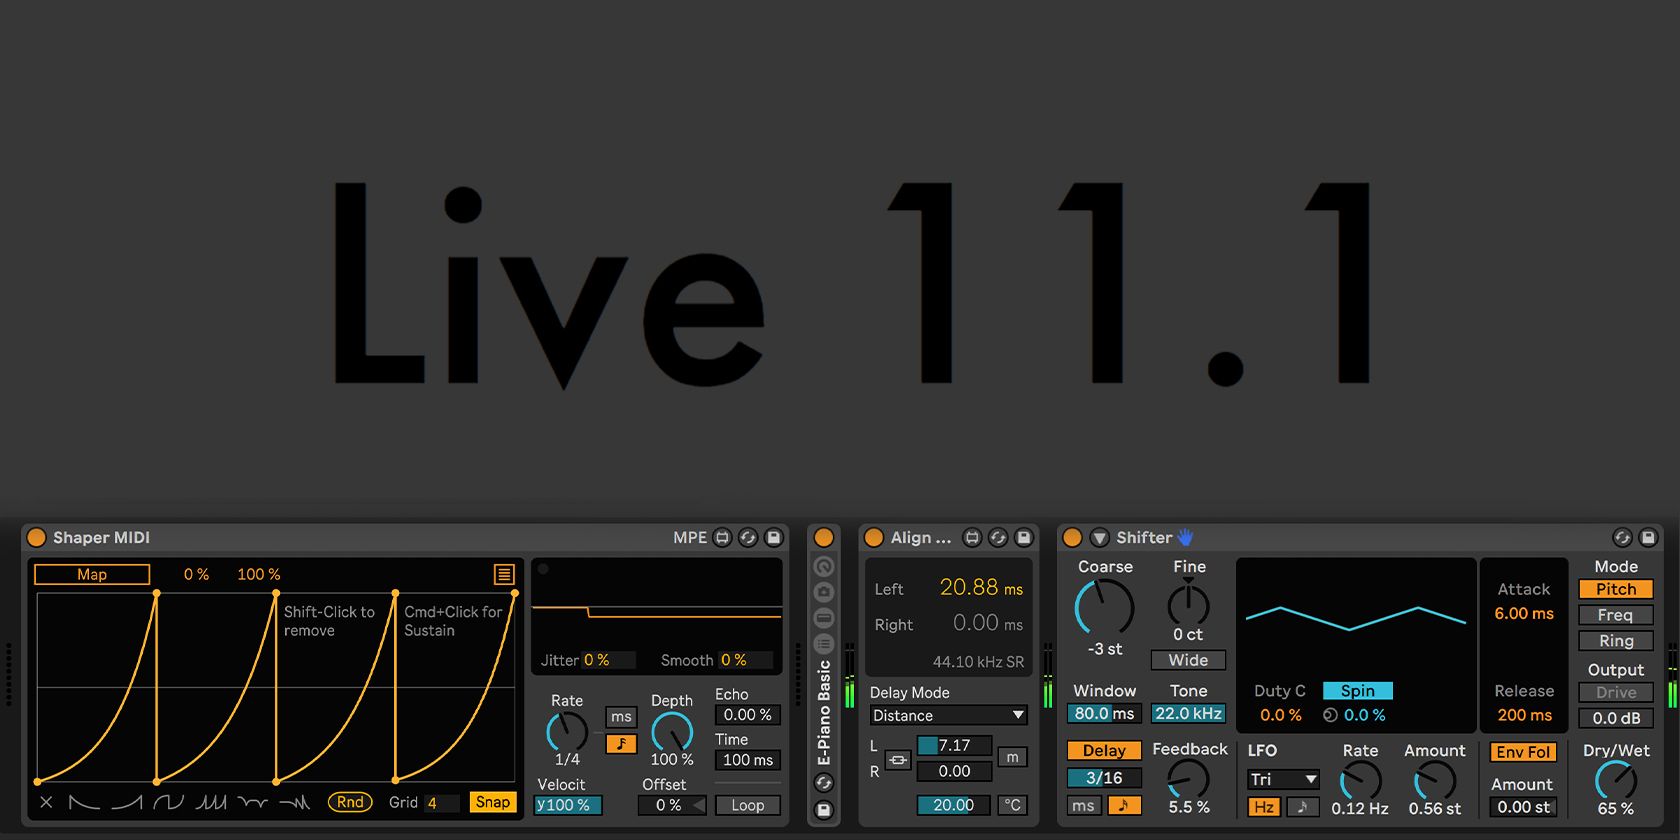 Ableton Live 11.1 featured image showing the new devices